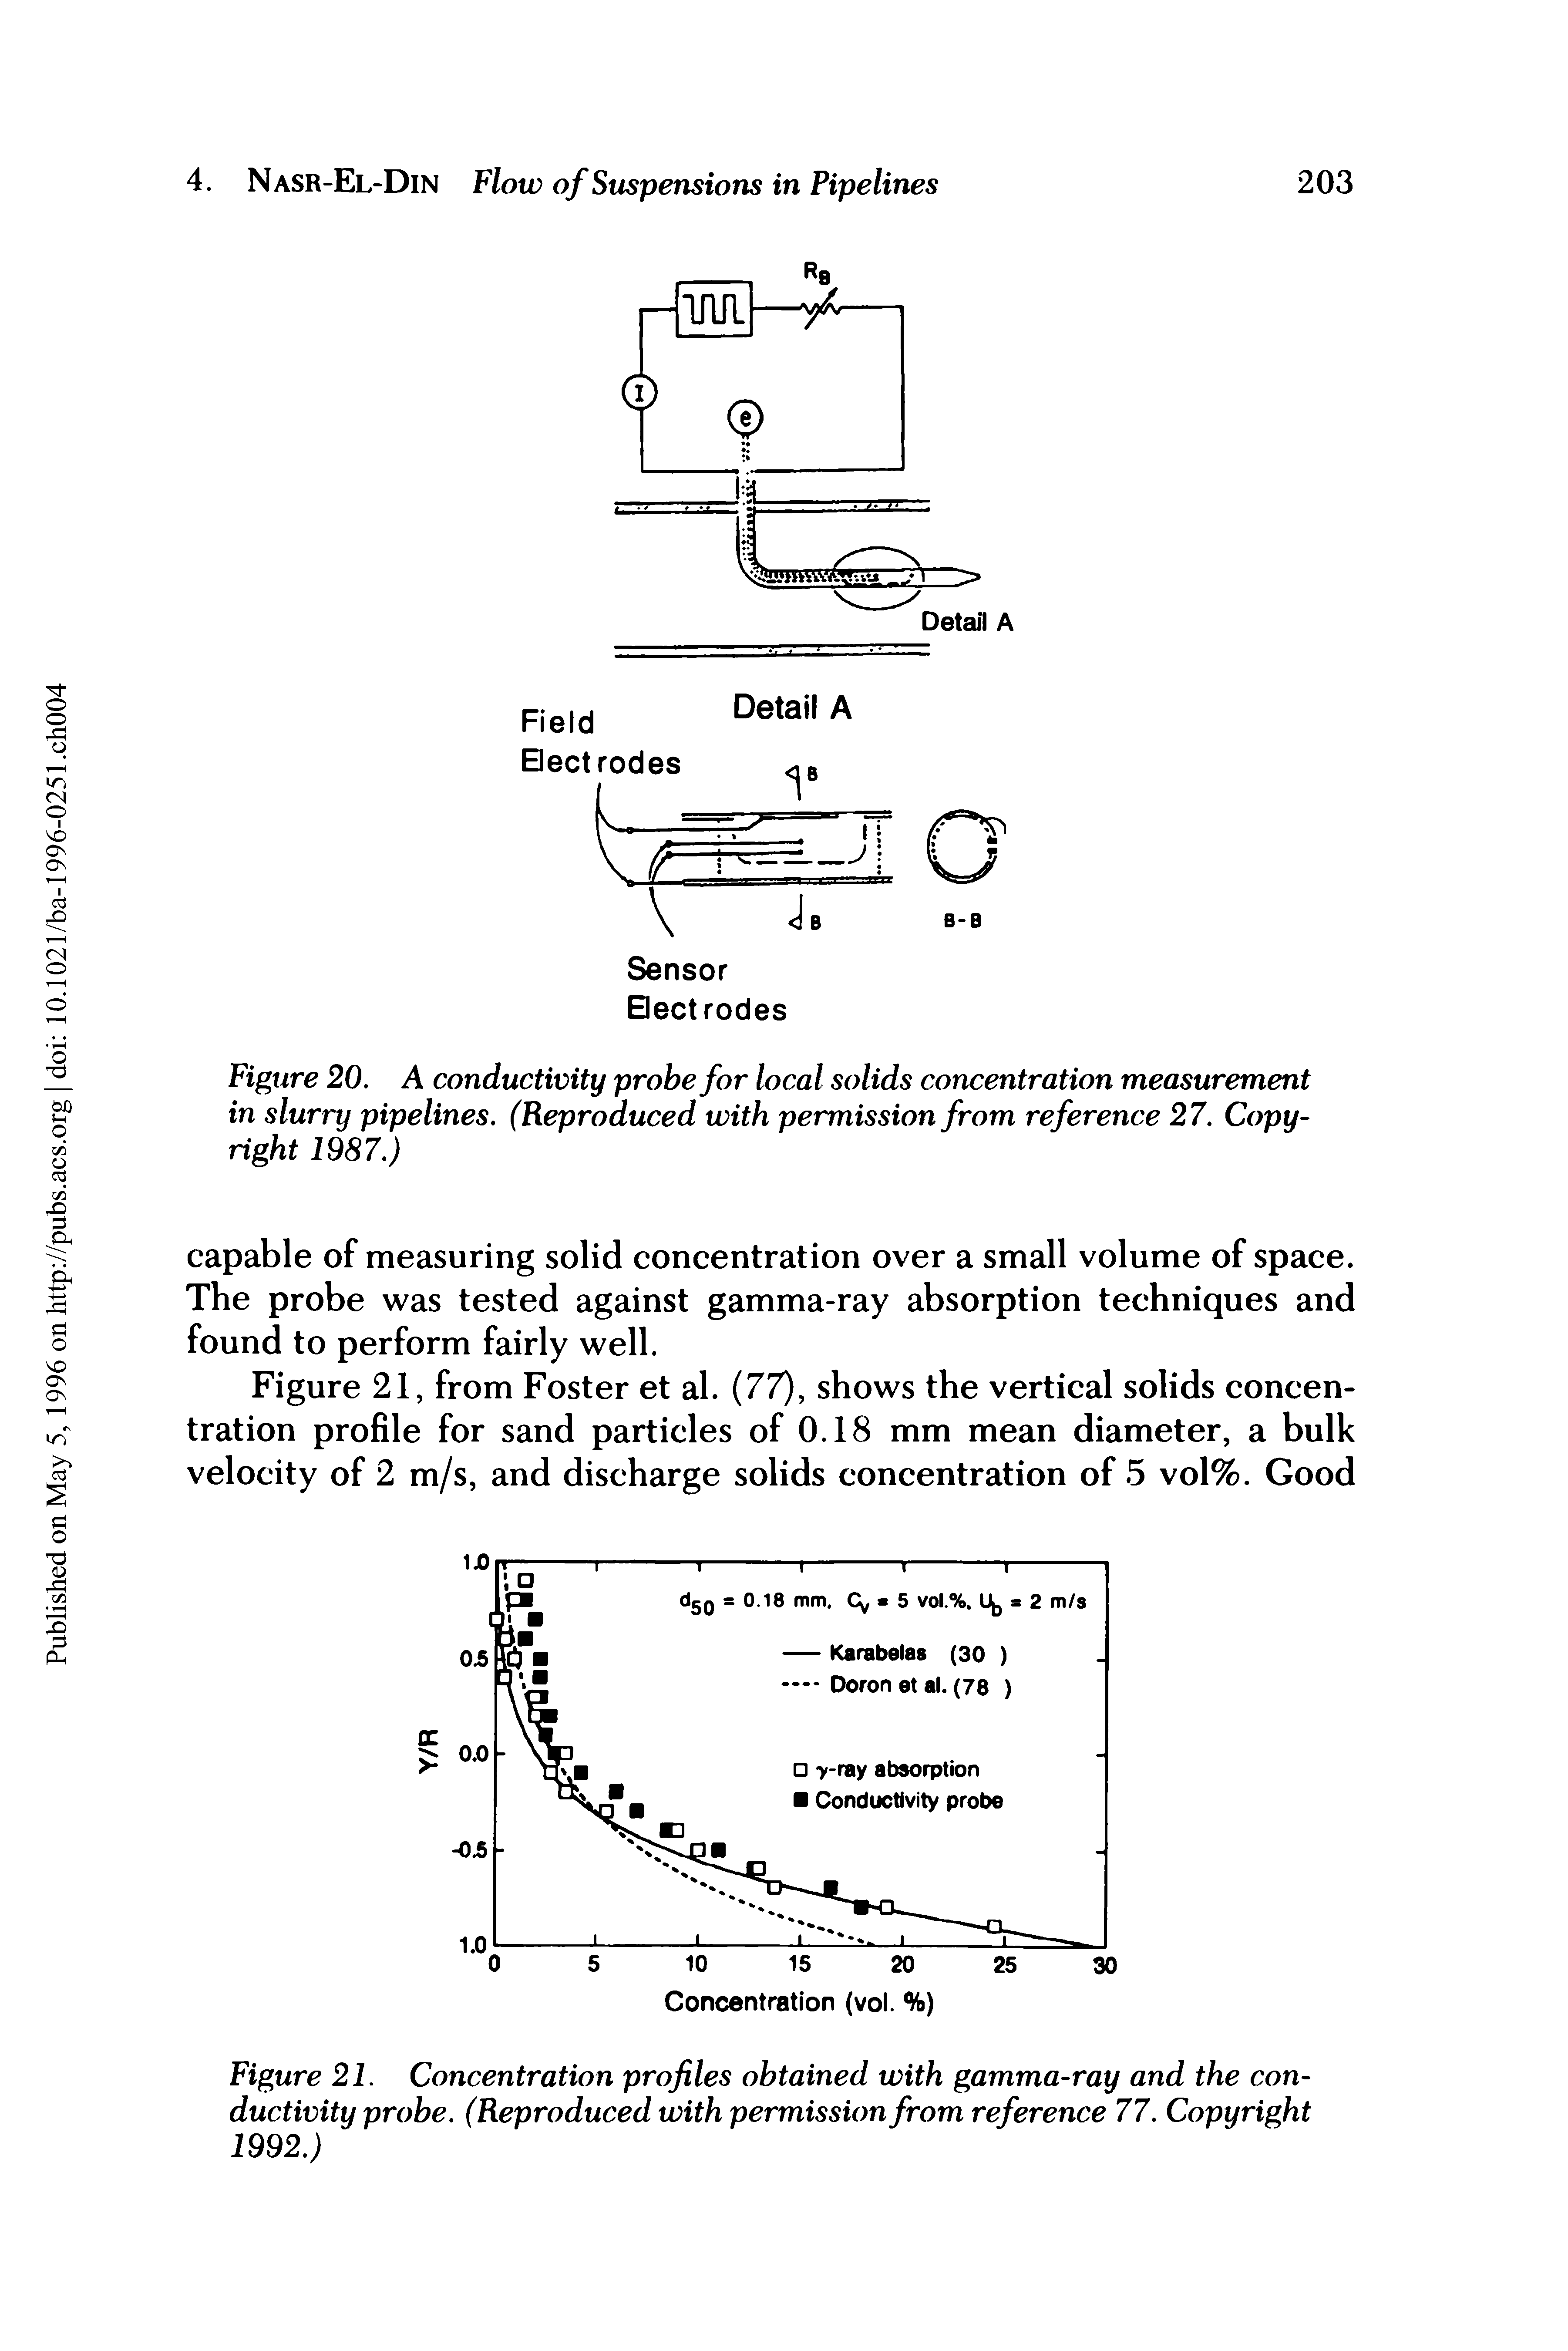 Figure 20. A conductivity probe for local solids concentration measurement in slurry pipelines. (Reproduced with permission from reference 27. Copyright 1987.)...